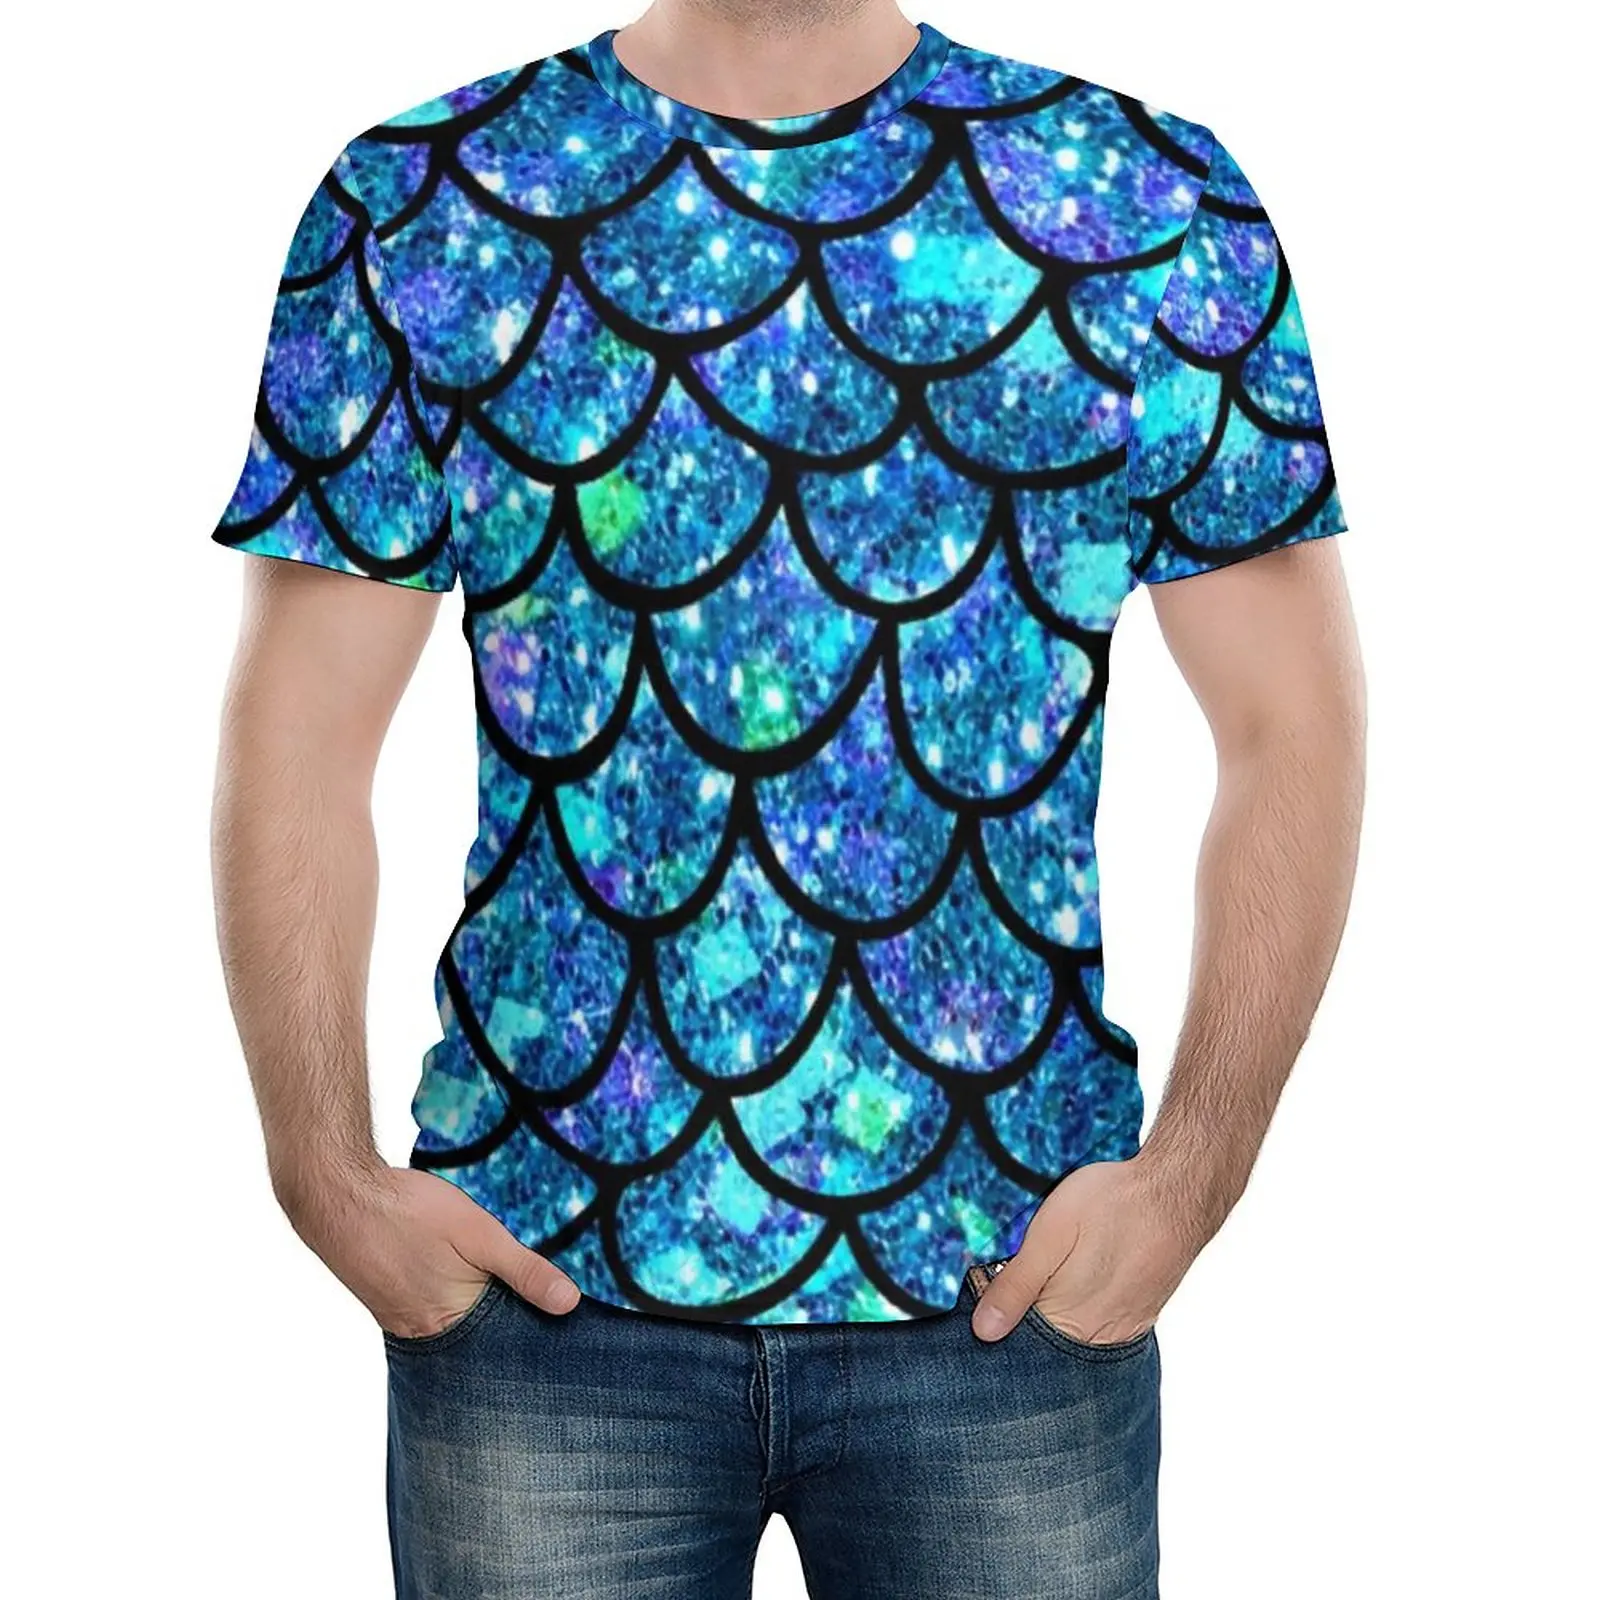 

Sparkly Mermaid Scales T-Shirt Couple Magical Colorful Print Awesome T-Shirts Novelty Tees Short Sleeve Graphic Oversize Tops